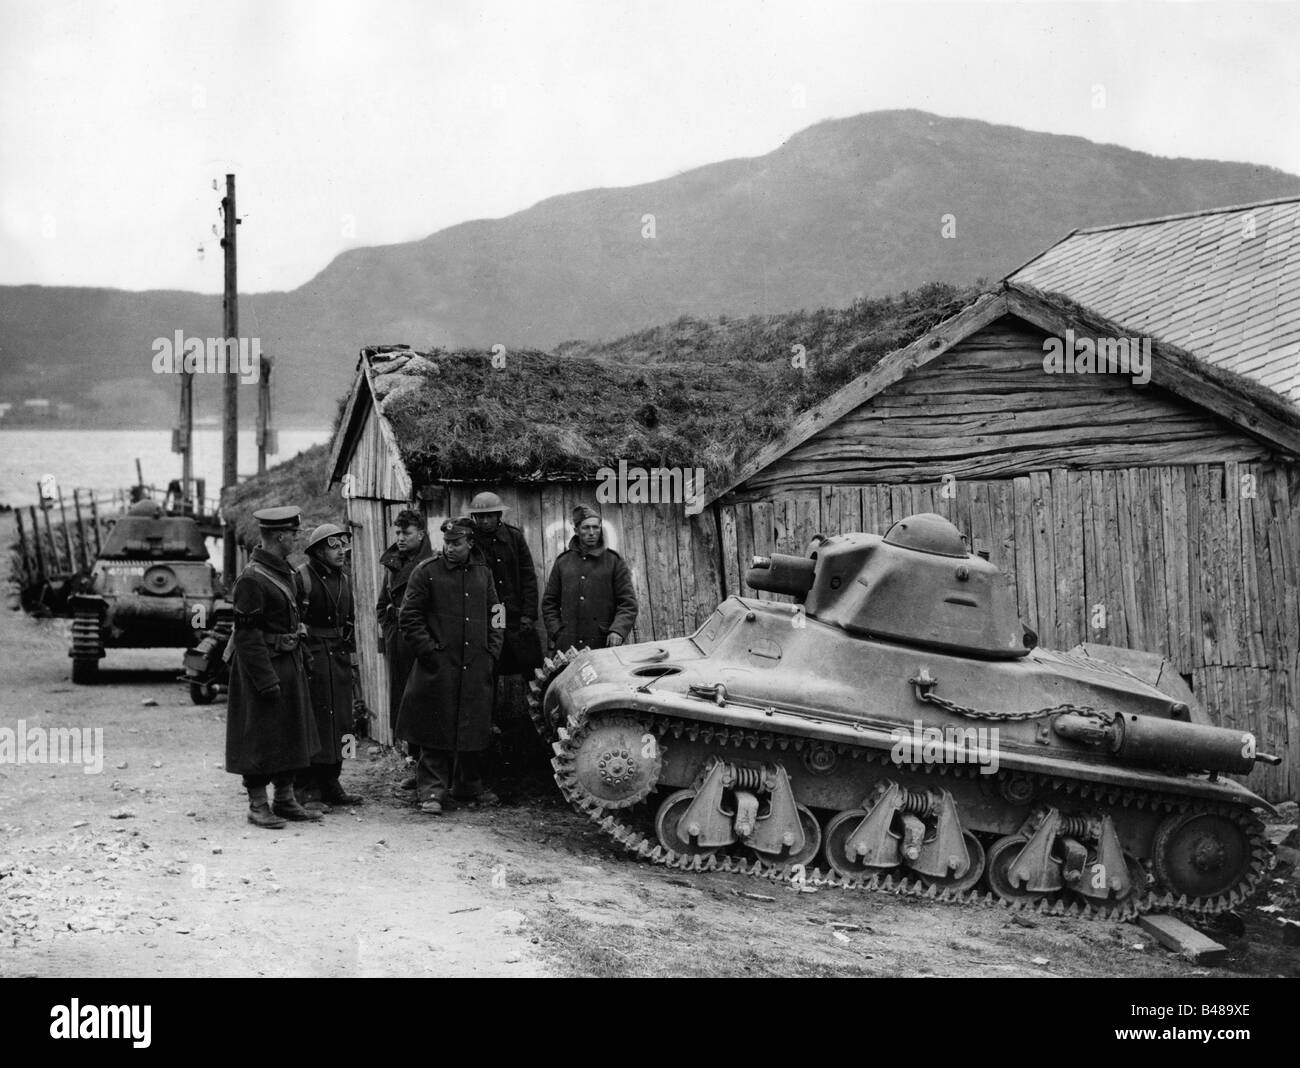 events, Second World War / WWII, Norway, British and French soldiers with French tanks Hotchkiss H35 at Steinland, 1.6.1940, tank, Skandinavia, expeditionary forces, corps, Allies, house, covered with grass, Hordaland, H-35, H 35, 20th century, historic, historical, people, 1940s, Stock Photo